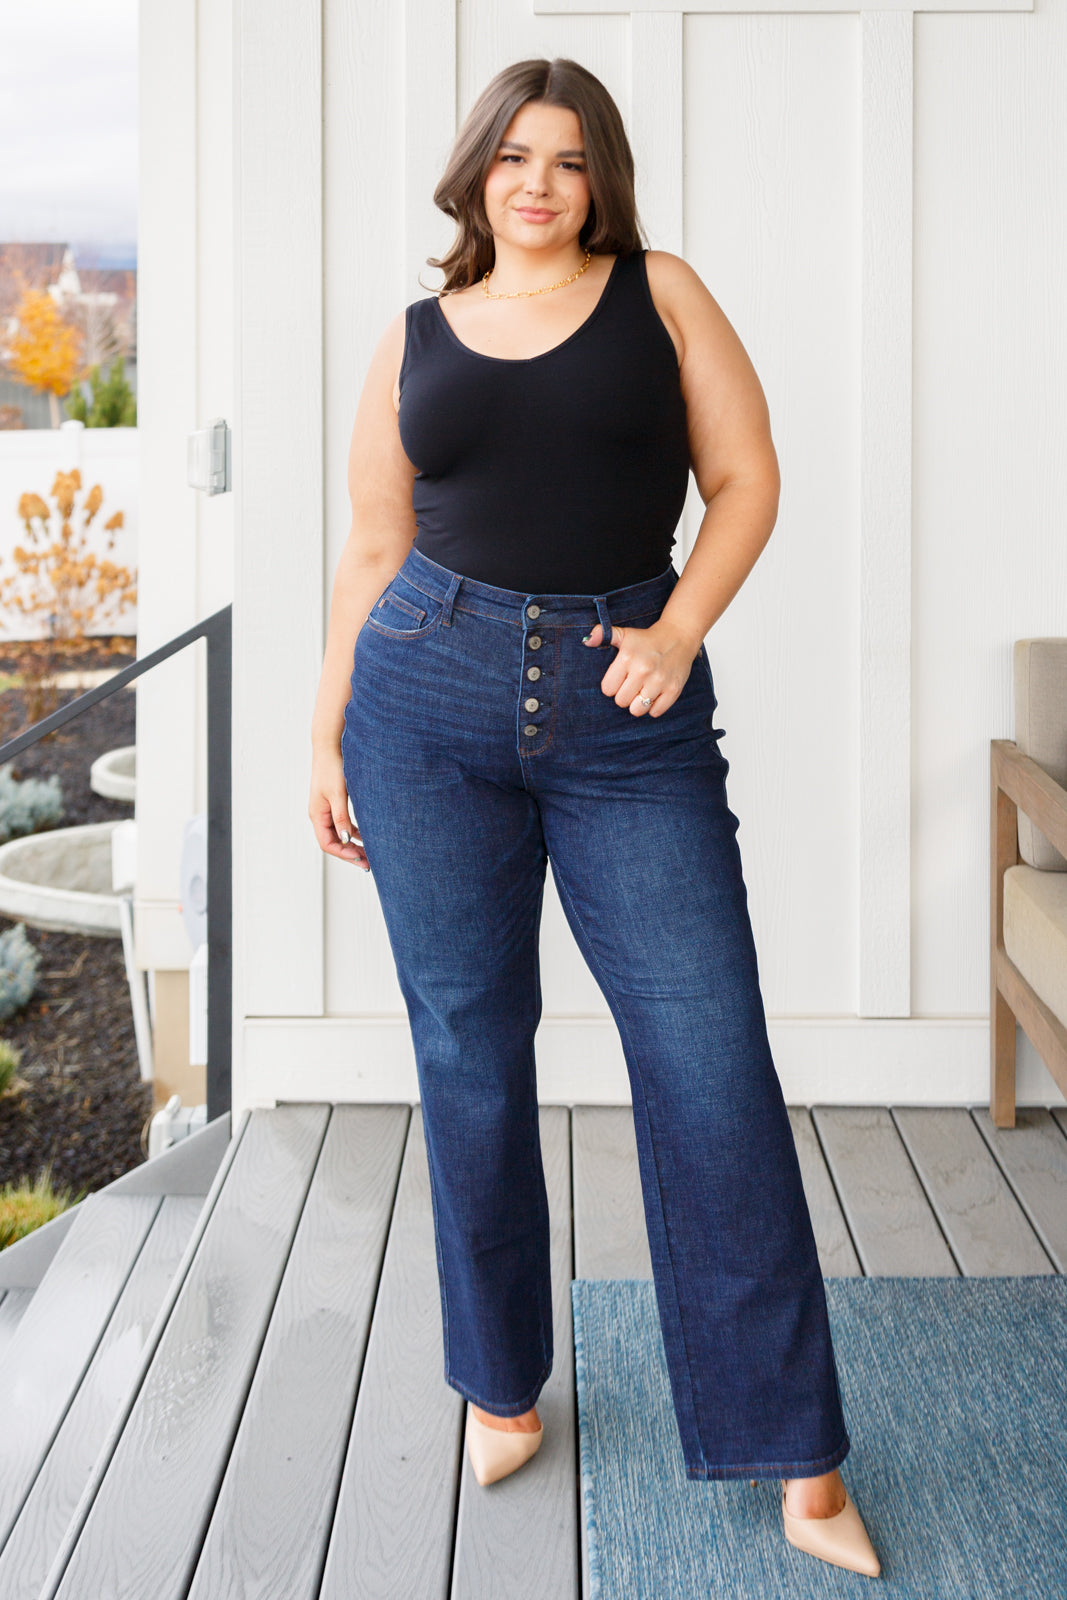 Take your wardrobe to new heights with Arlo High Rise Button-Fly Straight Jeans from Judy Blue! Crafted from dark-washed denim with a high-rise fit featuring a button-fly and straight silhouette, these jeans are perfect for any outfit. Let your style soar! 0 - 24W